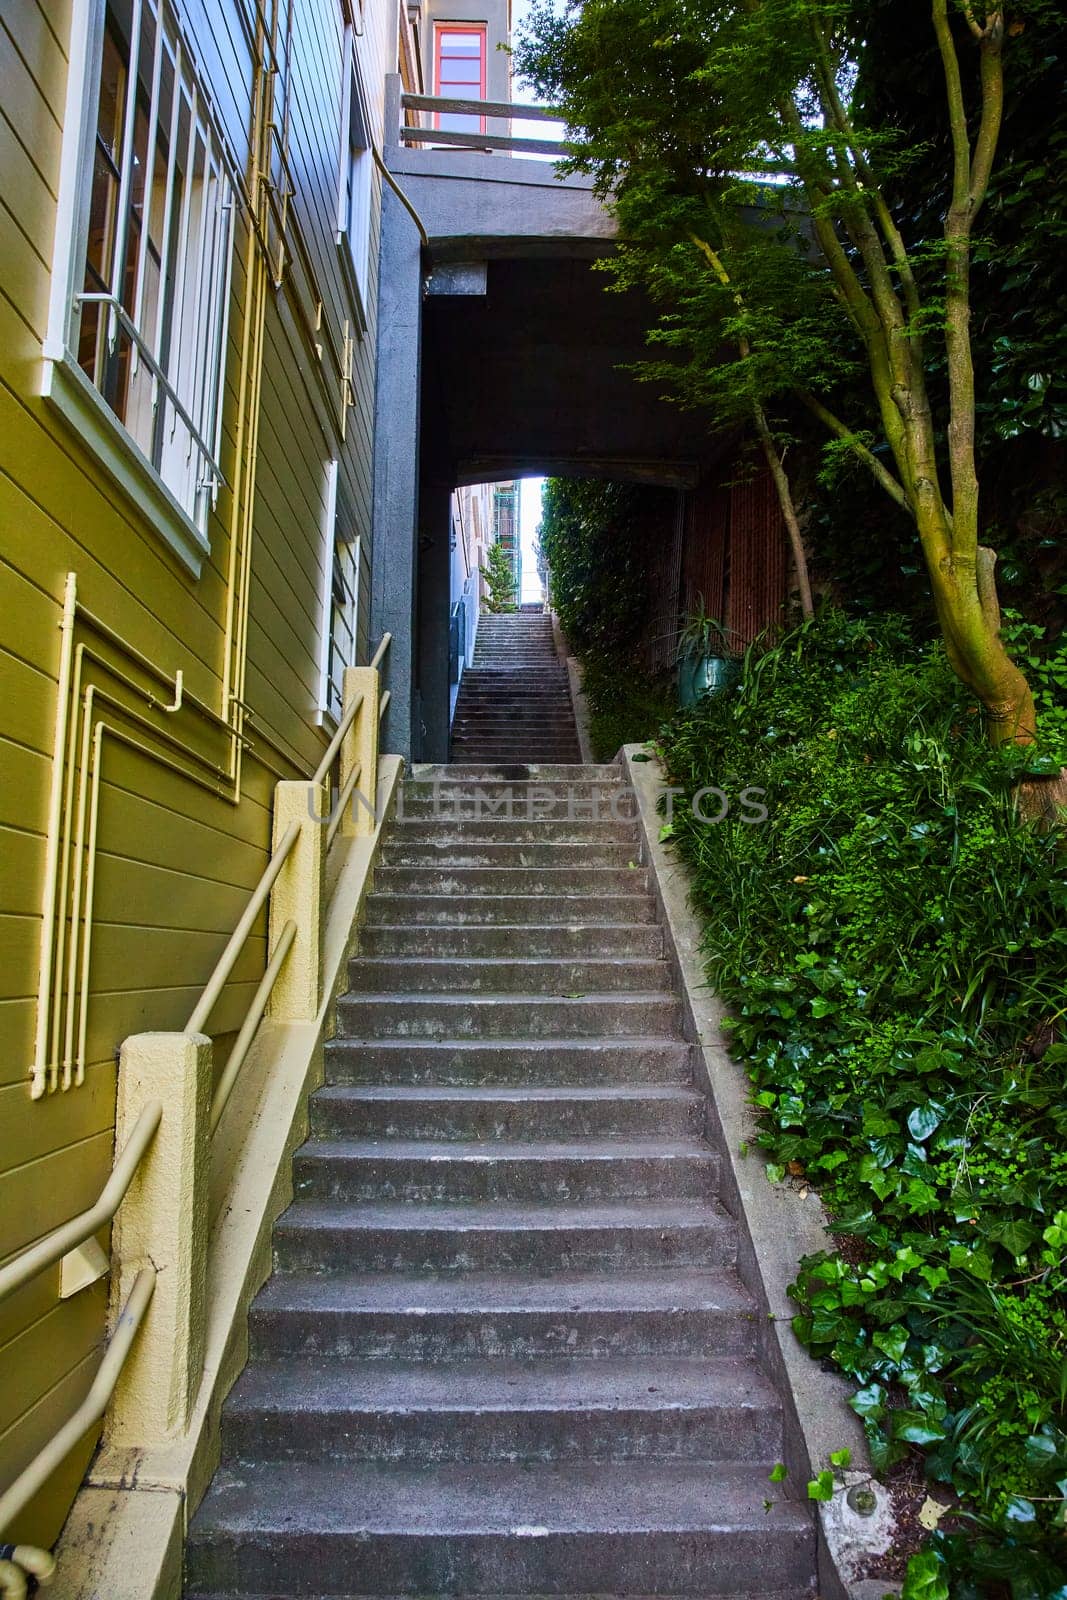 Image of Stairs leading up dark passage between a building and nature